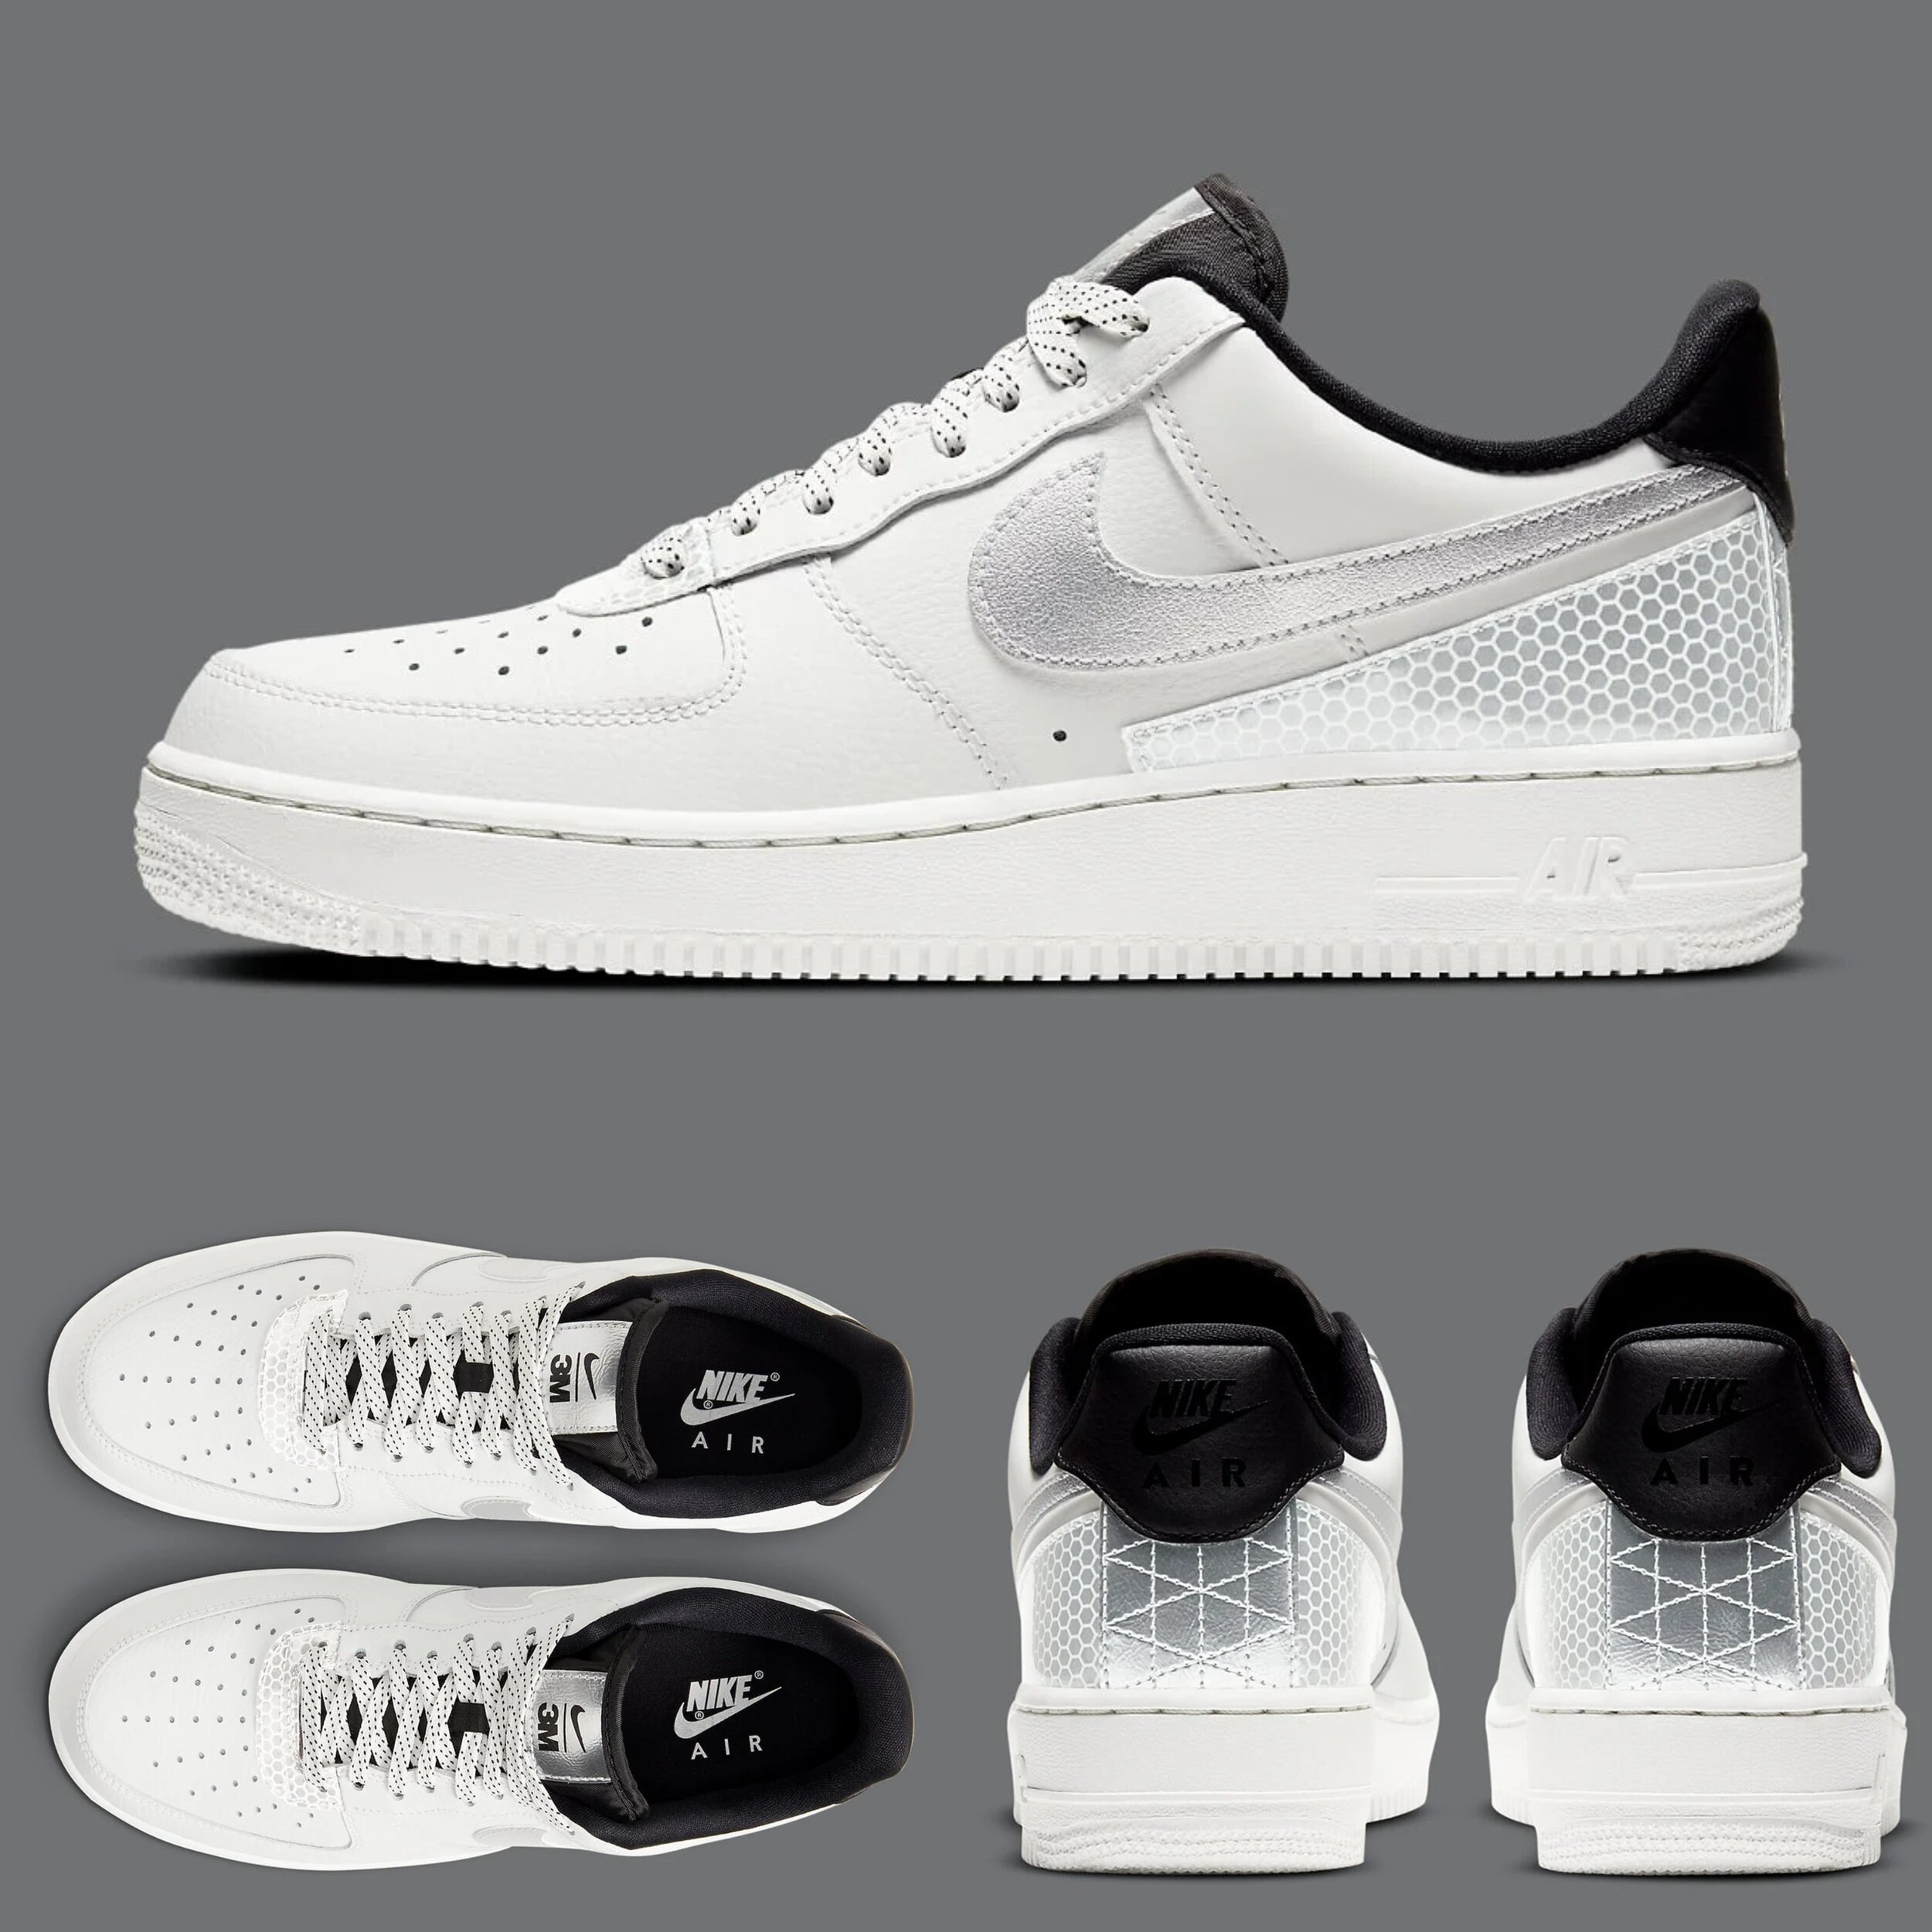 Now Available: 3M x Nike Air Force 1 Low "Summit White" — Sneaker Shouts